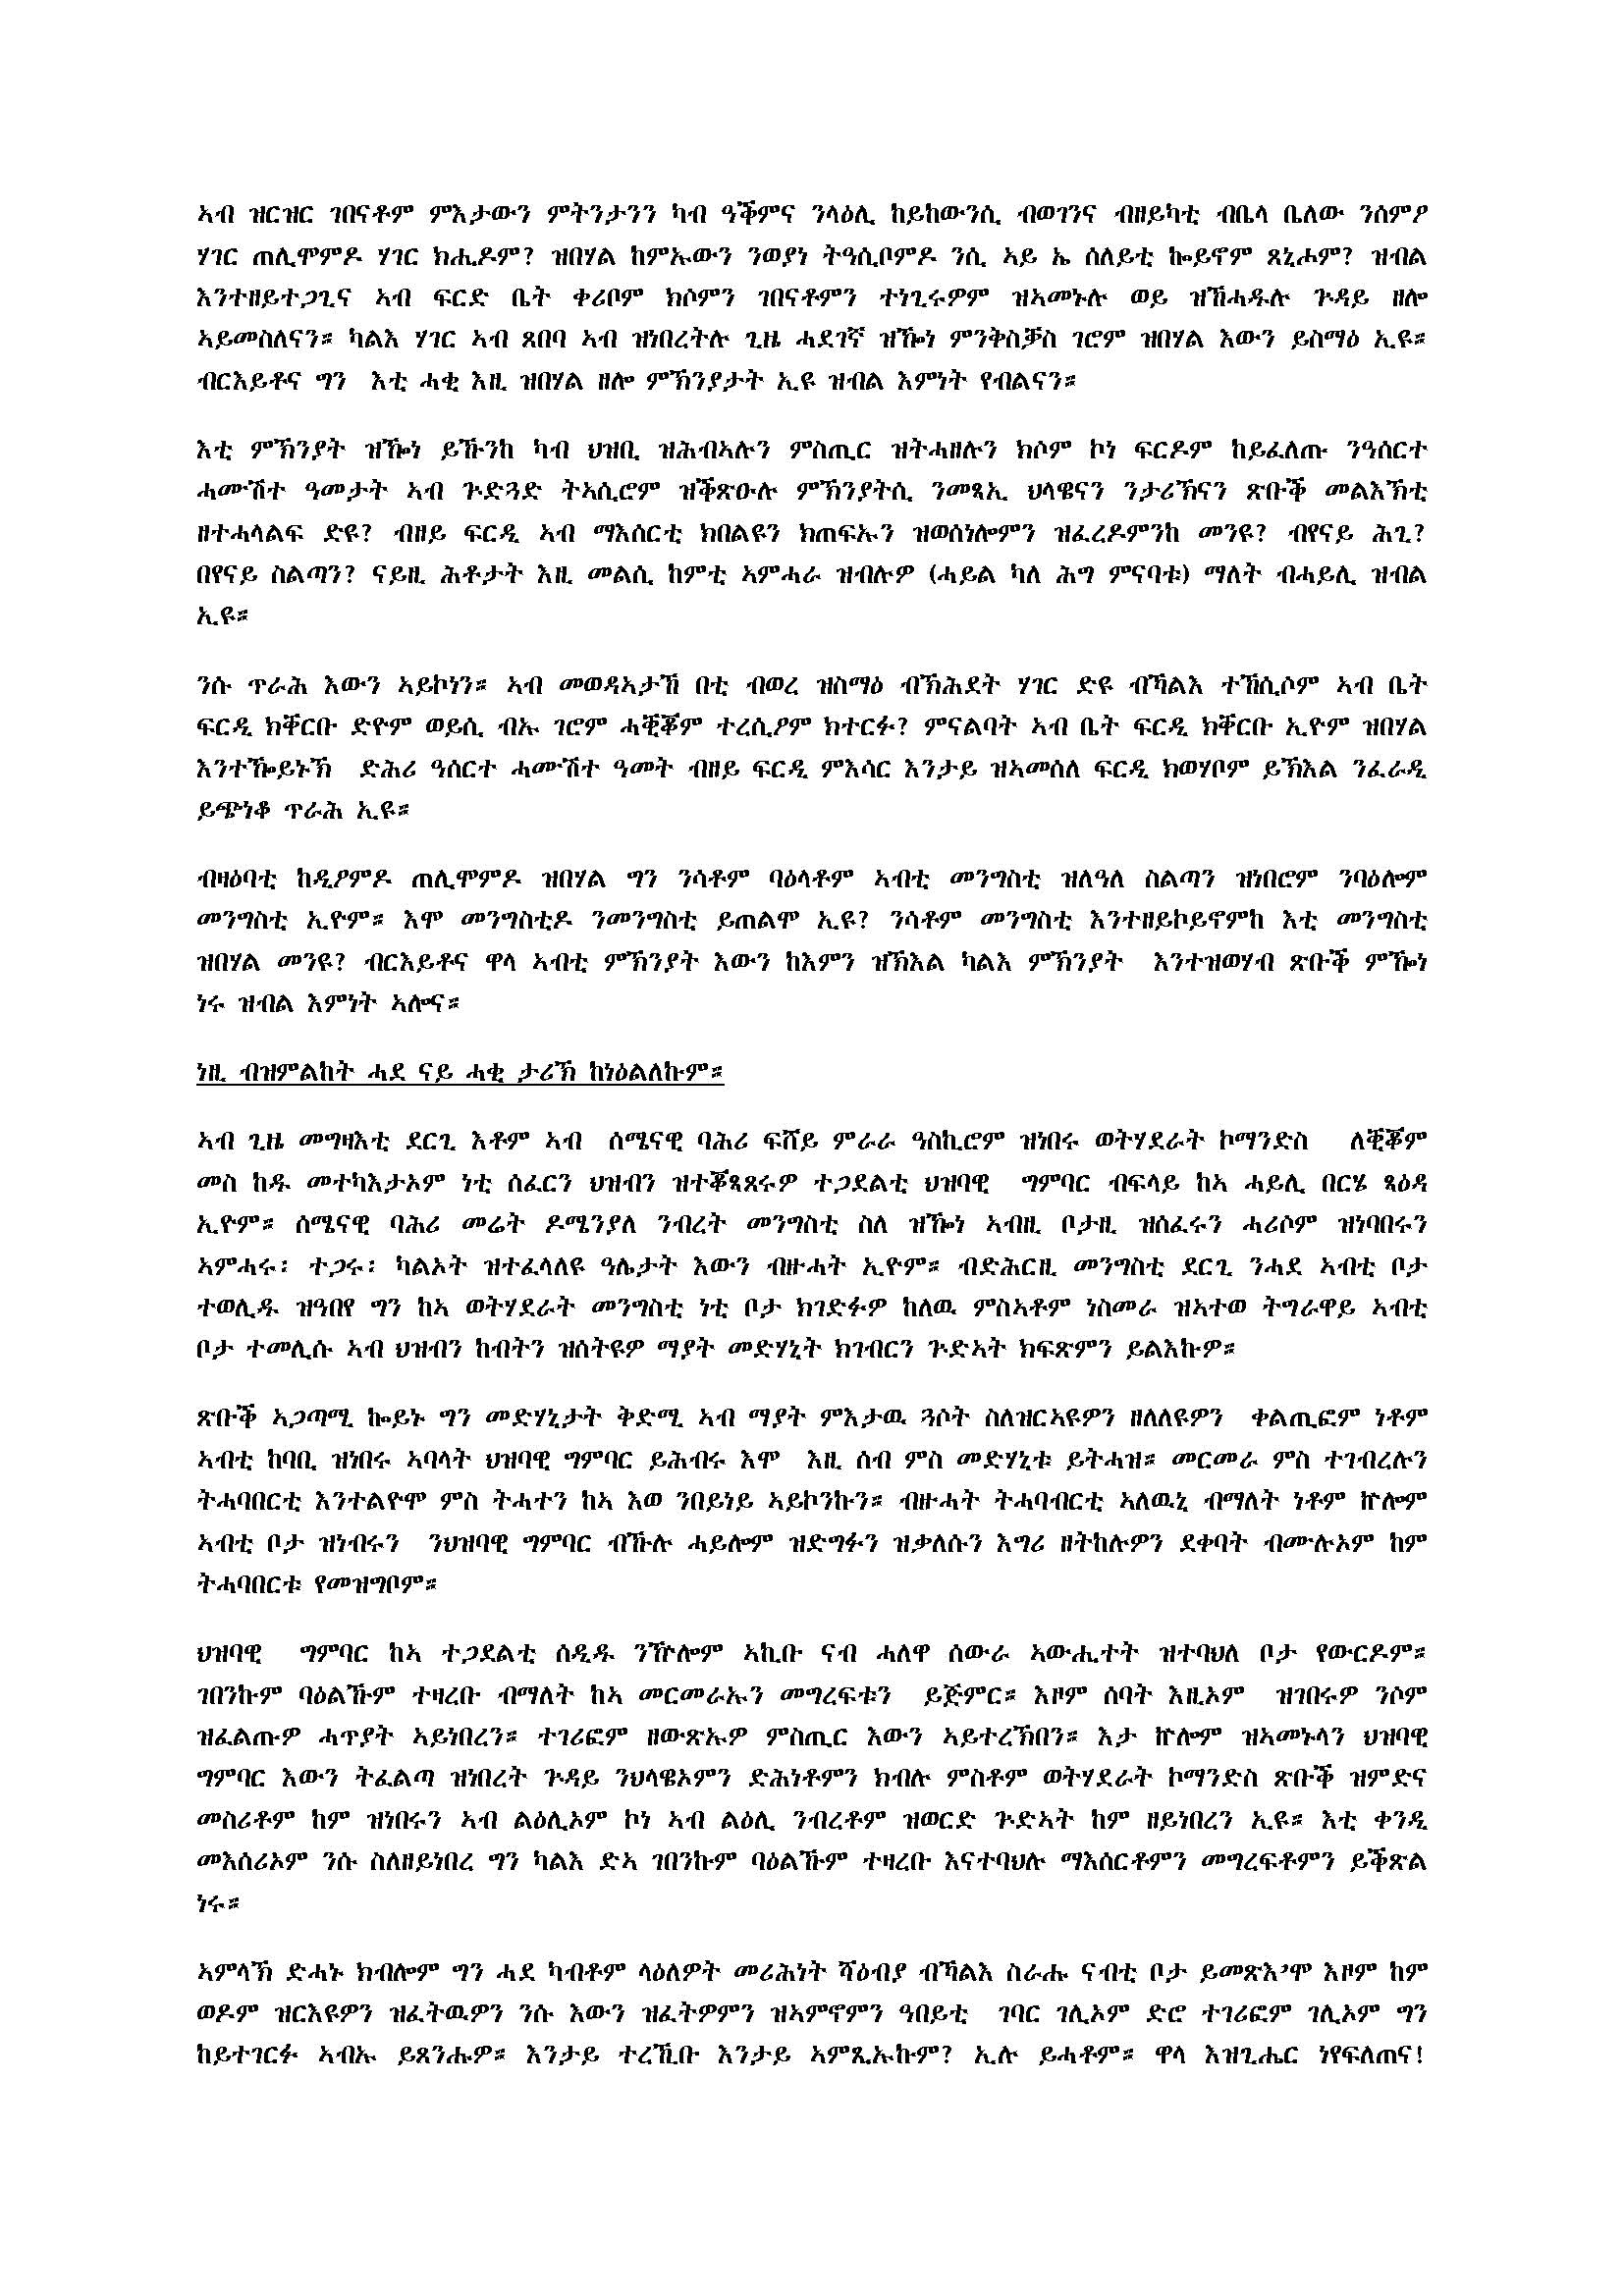 eritrean-opposition-and-demands3_page_3